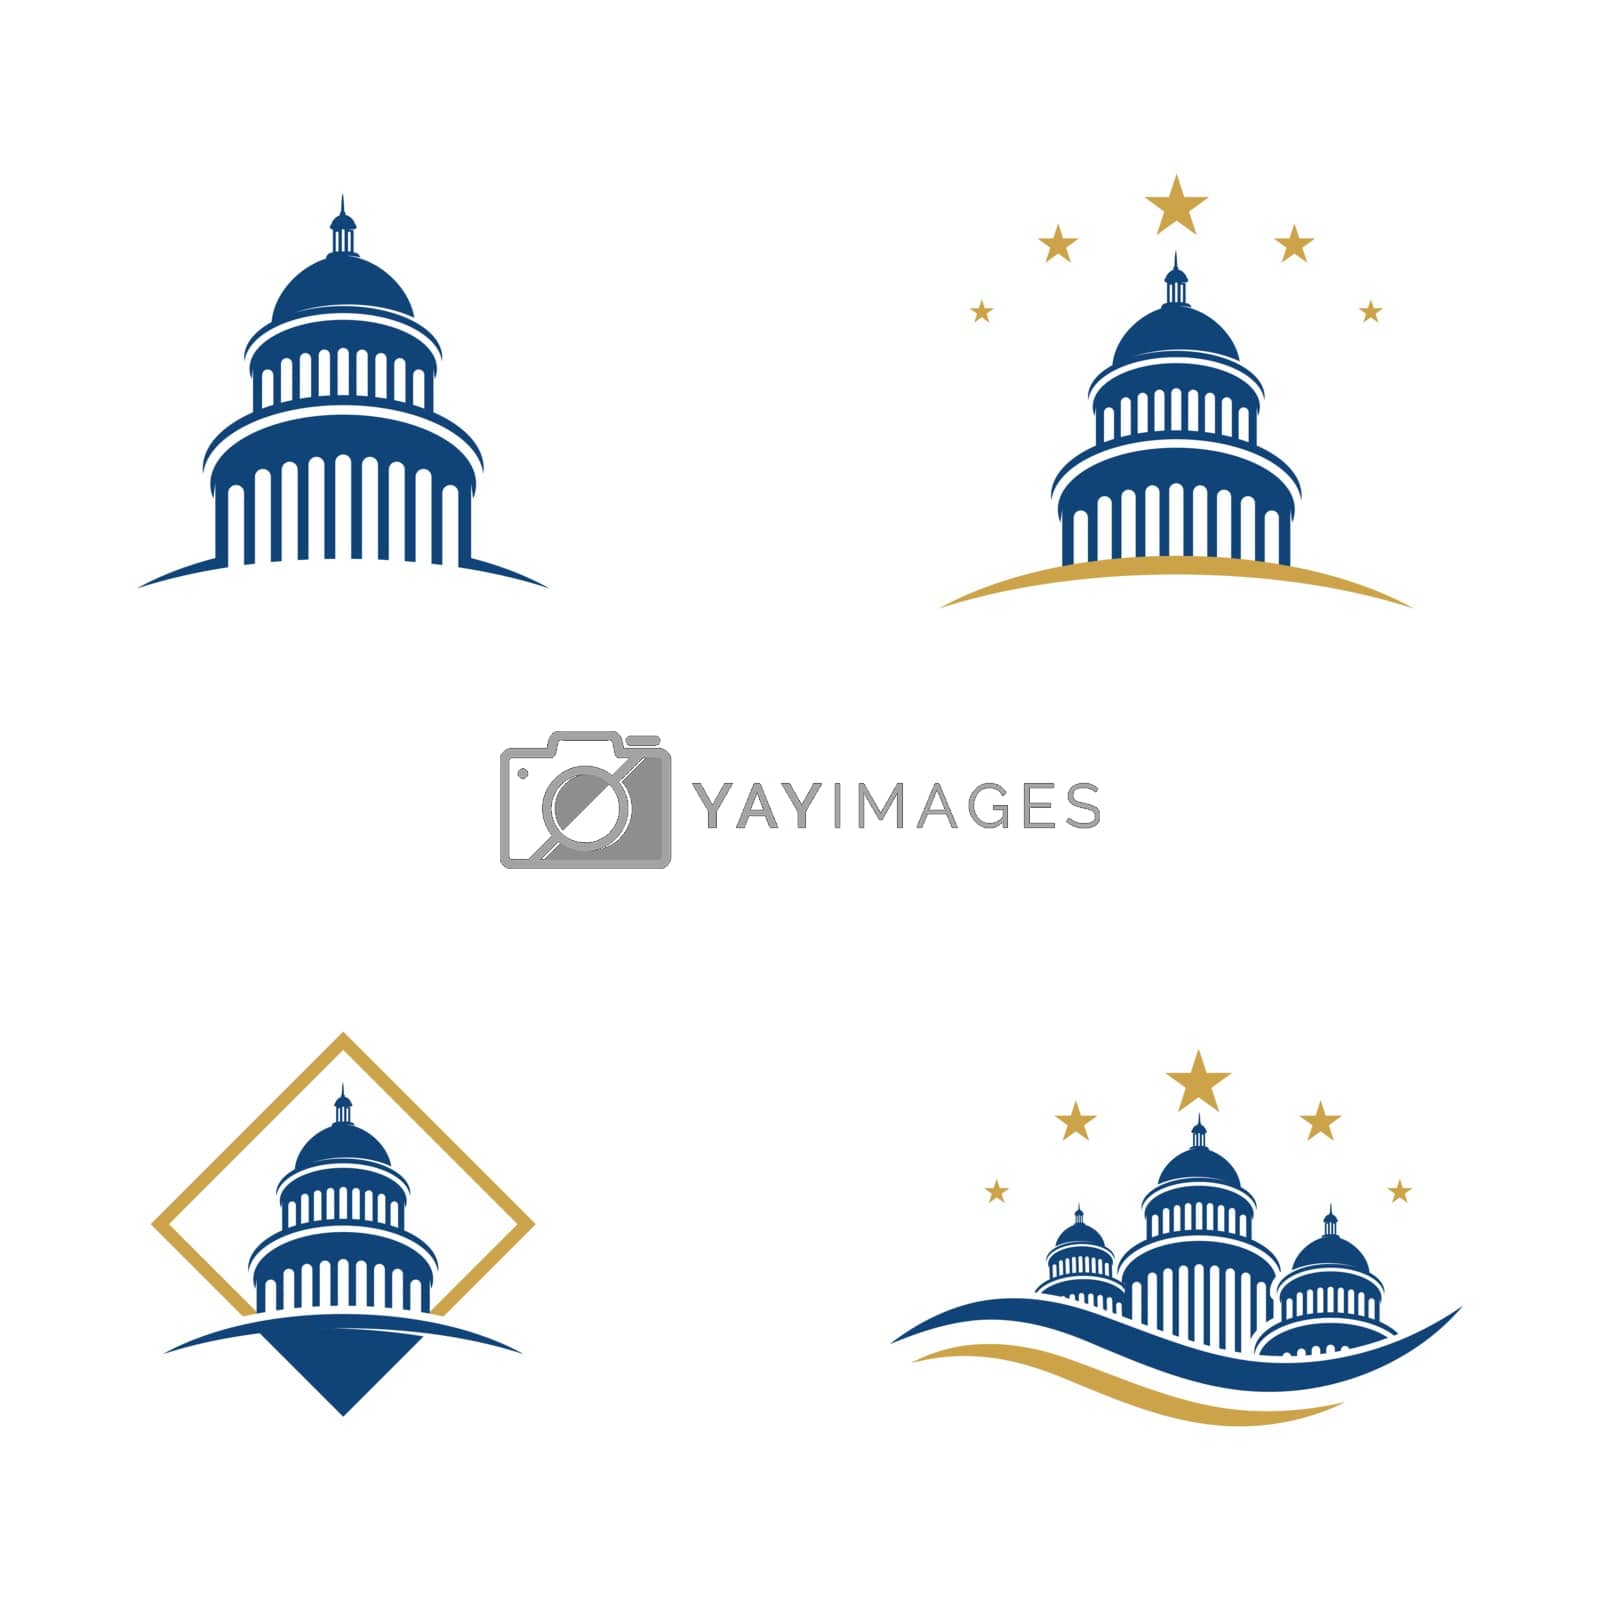 Royalty free image of Capitol vector icon illustration by Elaelo